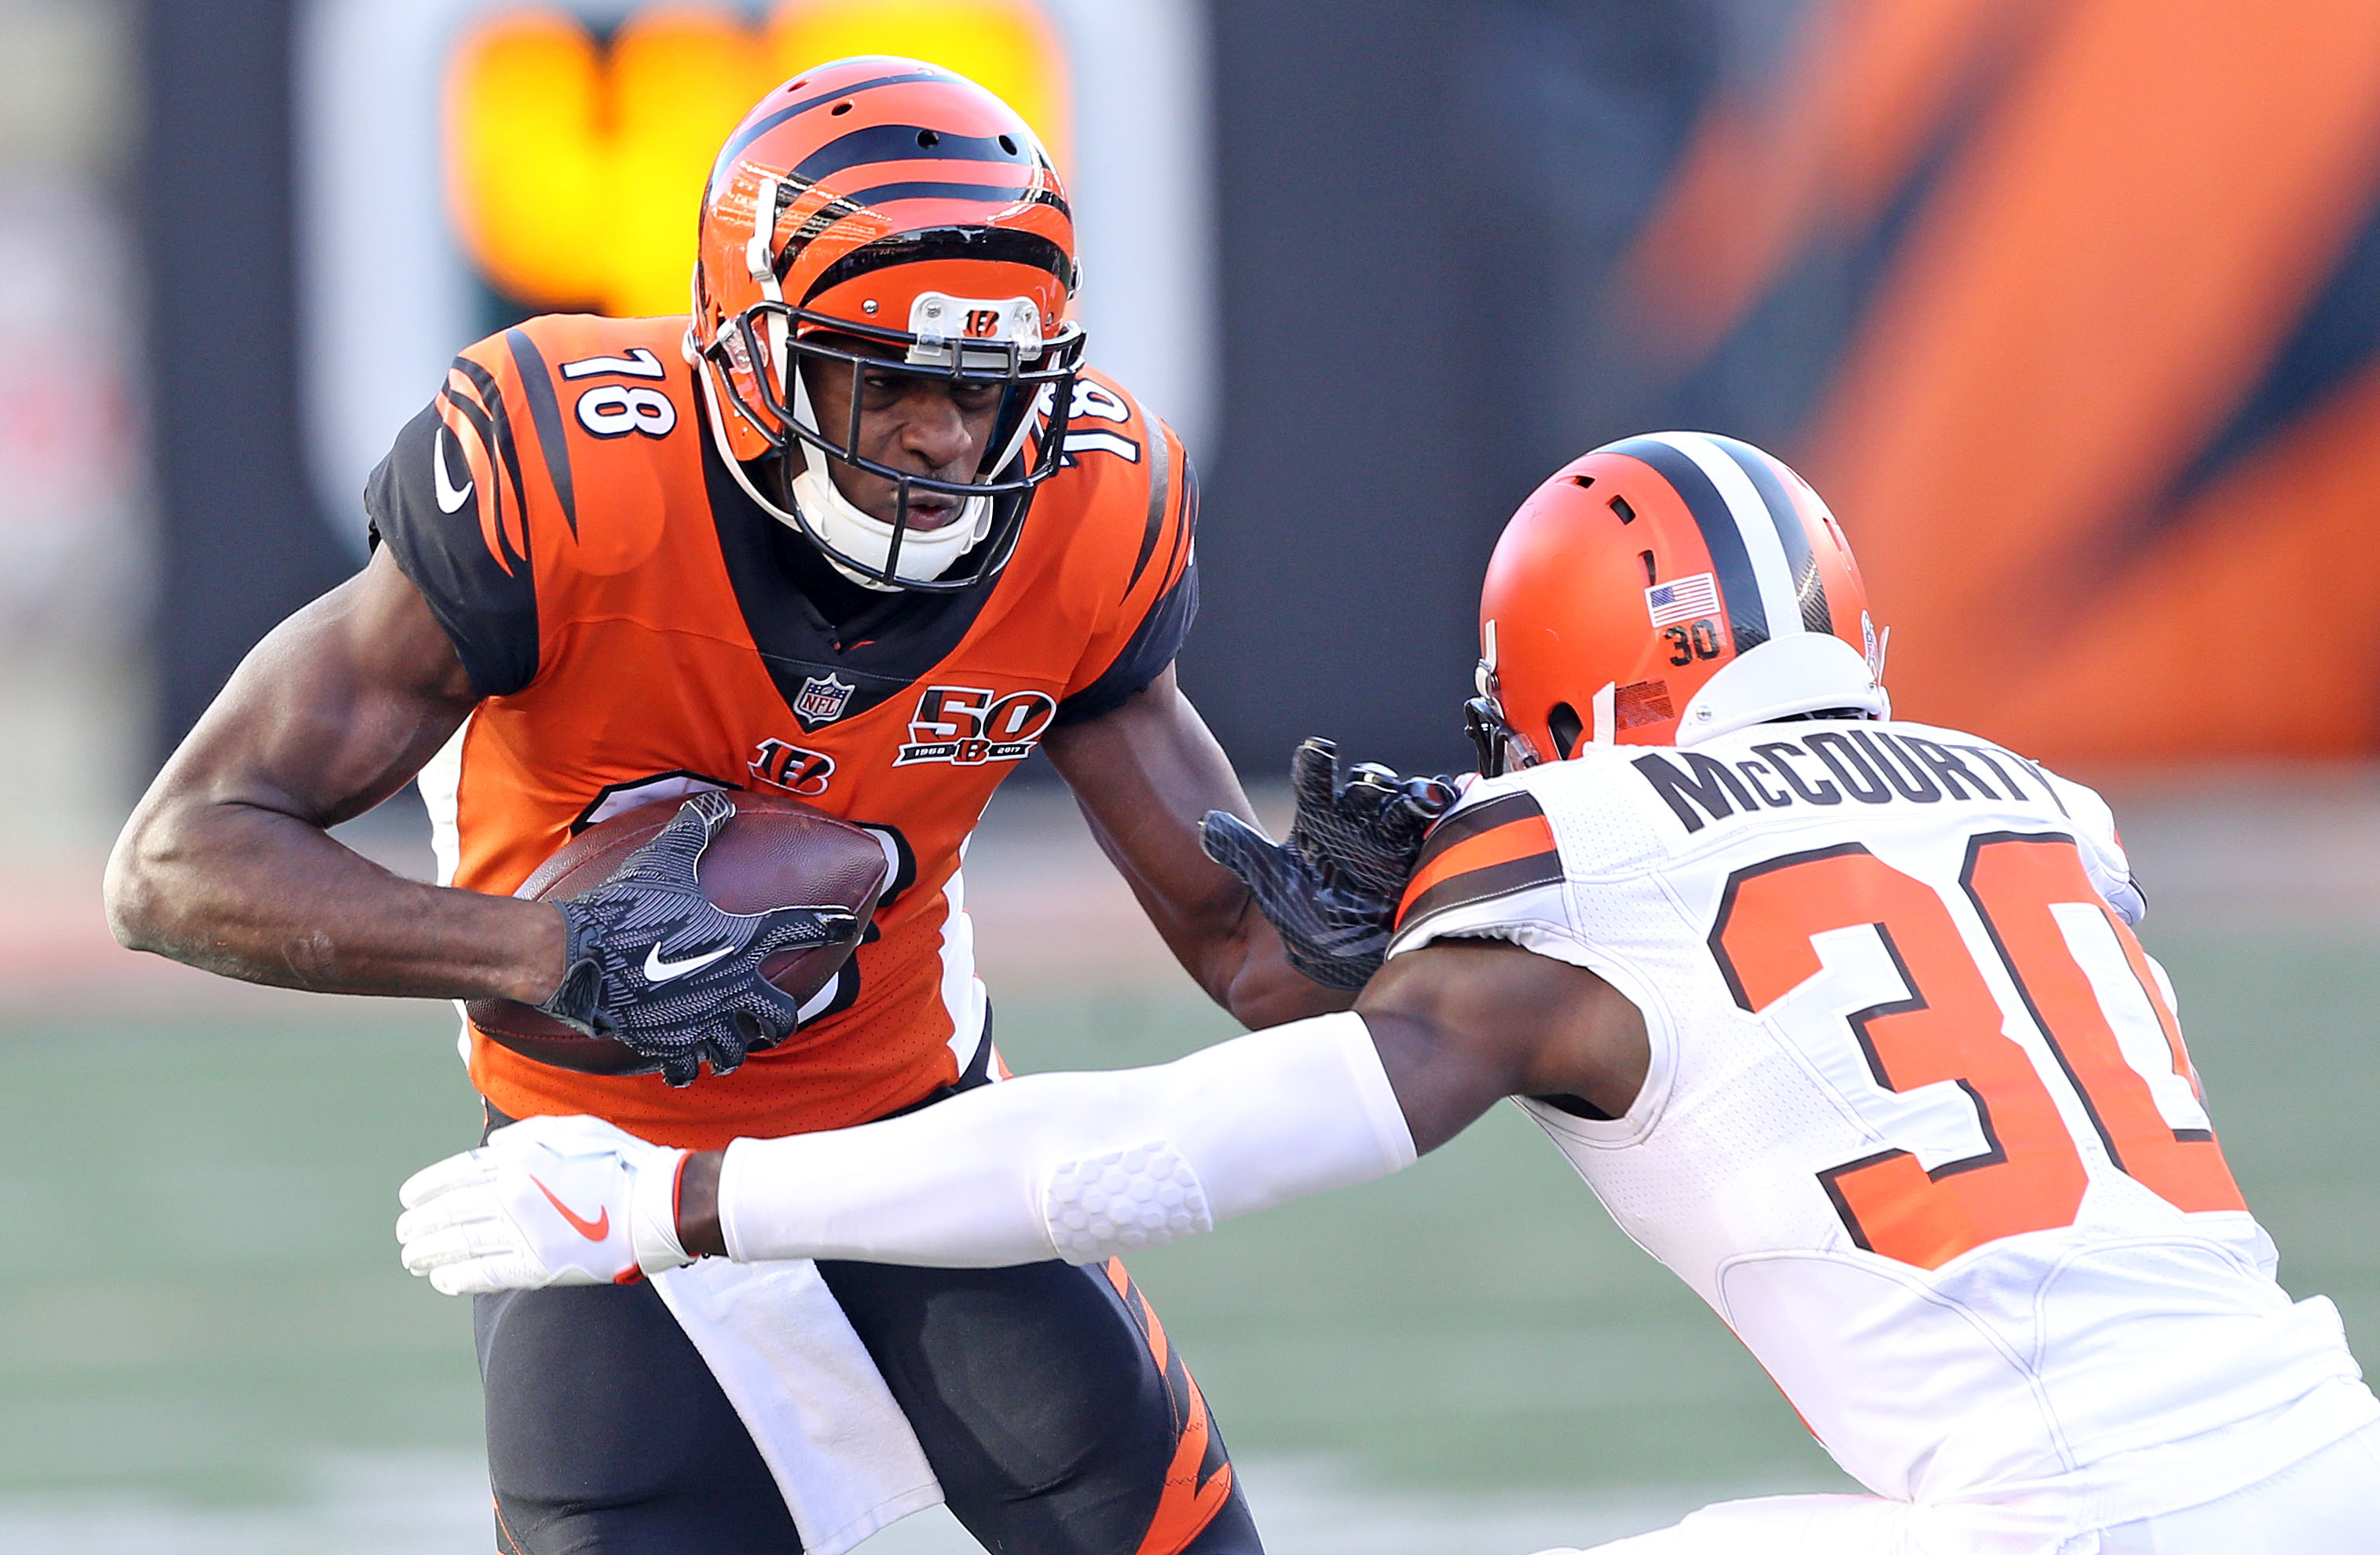 7-time Pro Bowl WR A.J. Green retires after 12-year NFL career